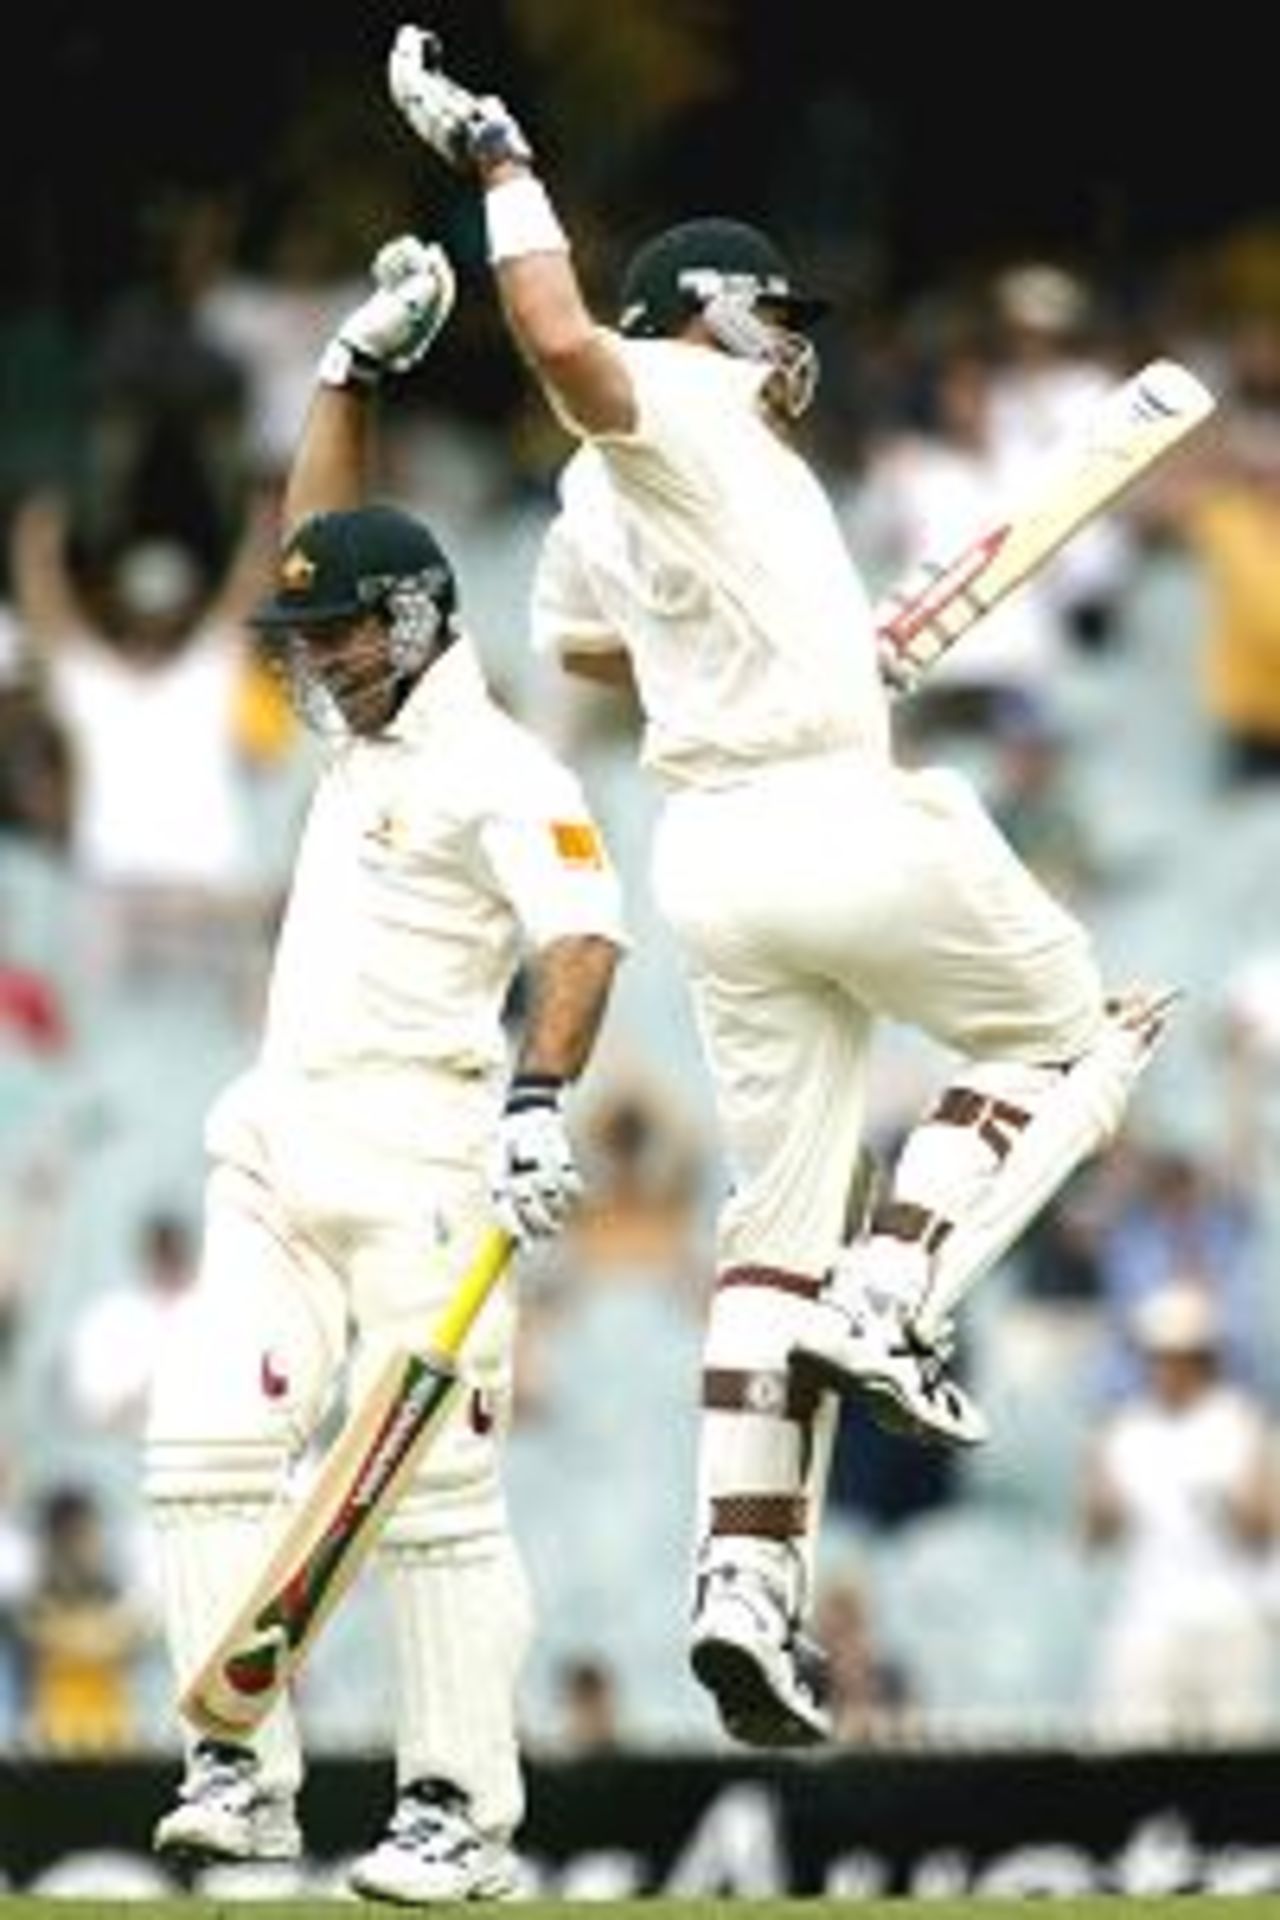 29 Dec 2001: Matthew Hayden and Ricky Ponting from Australia celebrate while running the wining run to win the Test Series against South Africa at the Melbourne Cricket Ground in Melbourne, Australia.